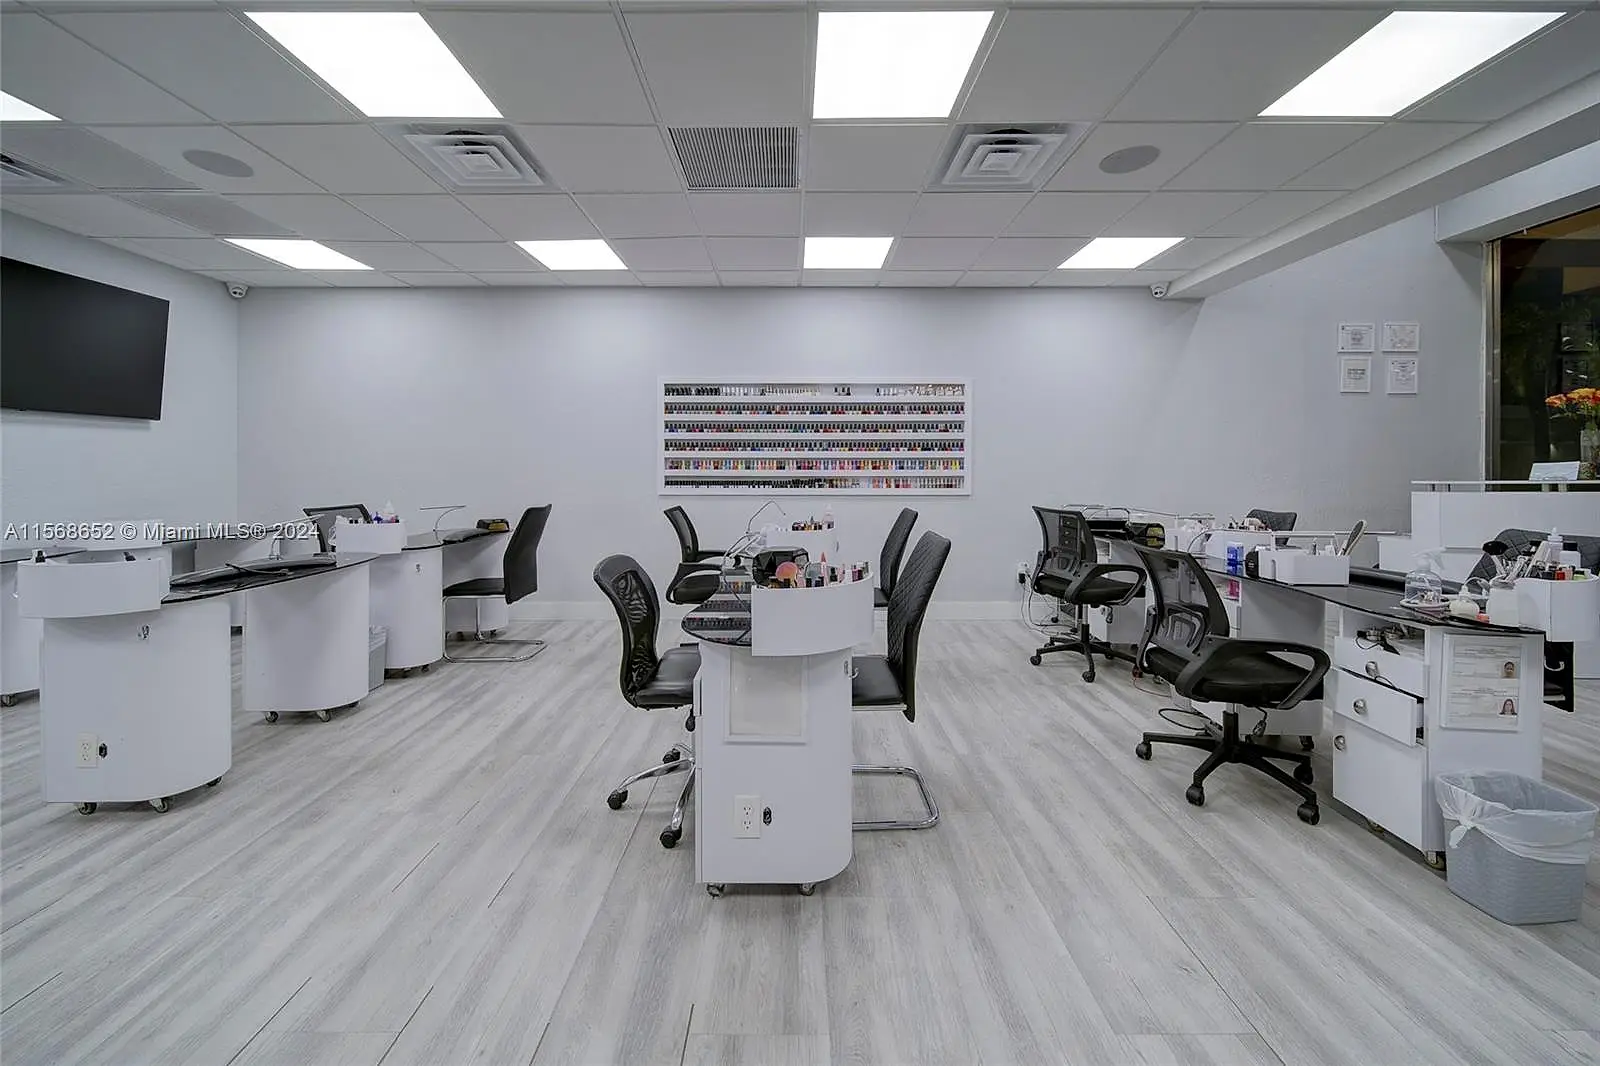 Full-Service Beauty Salon For Sale In Westchester